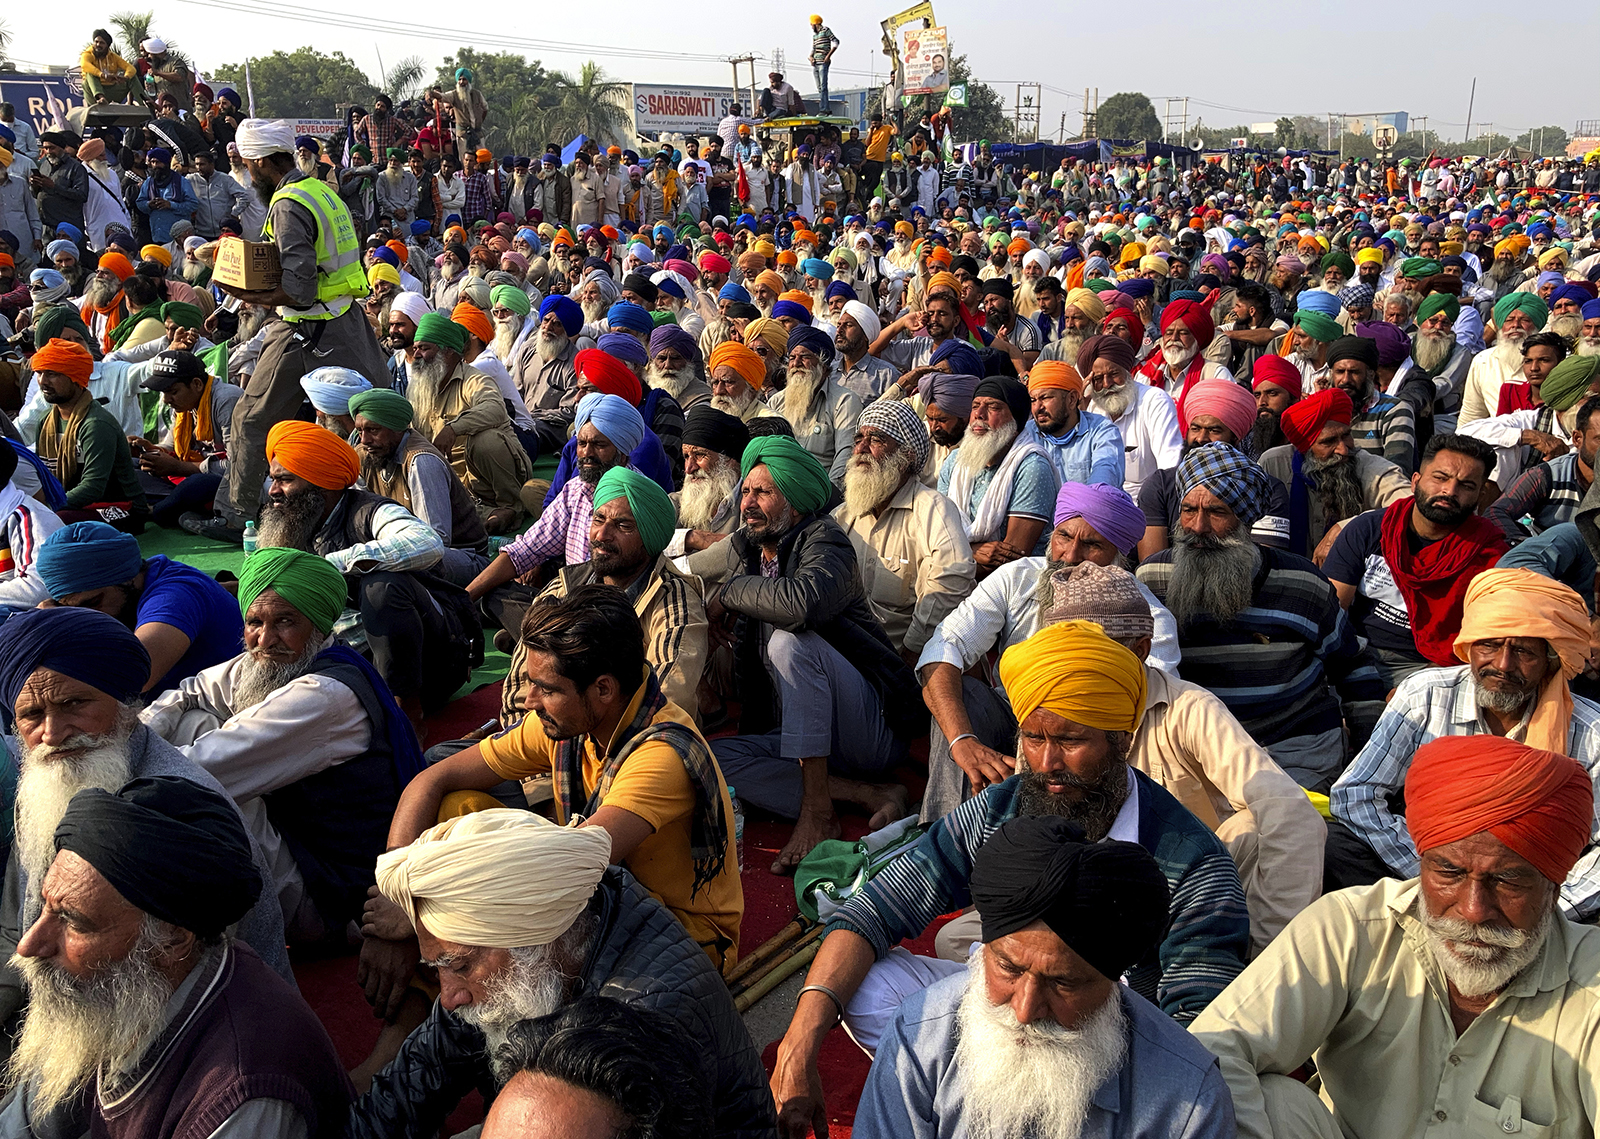 Indian farmers protesting new agriculture laws hold a meeting at the Delhi-Haryana state border, Monday, Nov. 30, 2020. Indian Prime Minister Narendra Modi tried to placate thousands of farmers protesting new agriculture laws Monday. While trying to march toward New Delhi, the farmers, using their tractors, have cleared concrete blockades, walls of shipping containers and horizontally parked trucks after police had set them up as barricades and dug trenches on highways to block roads leading to the capital. (AP Photo/Rishi Lekhi)